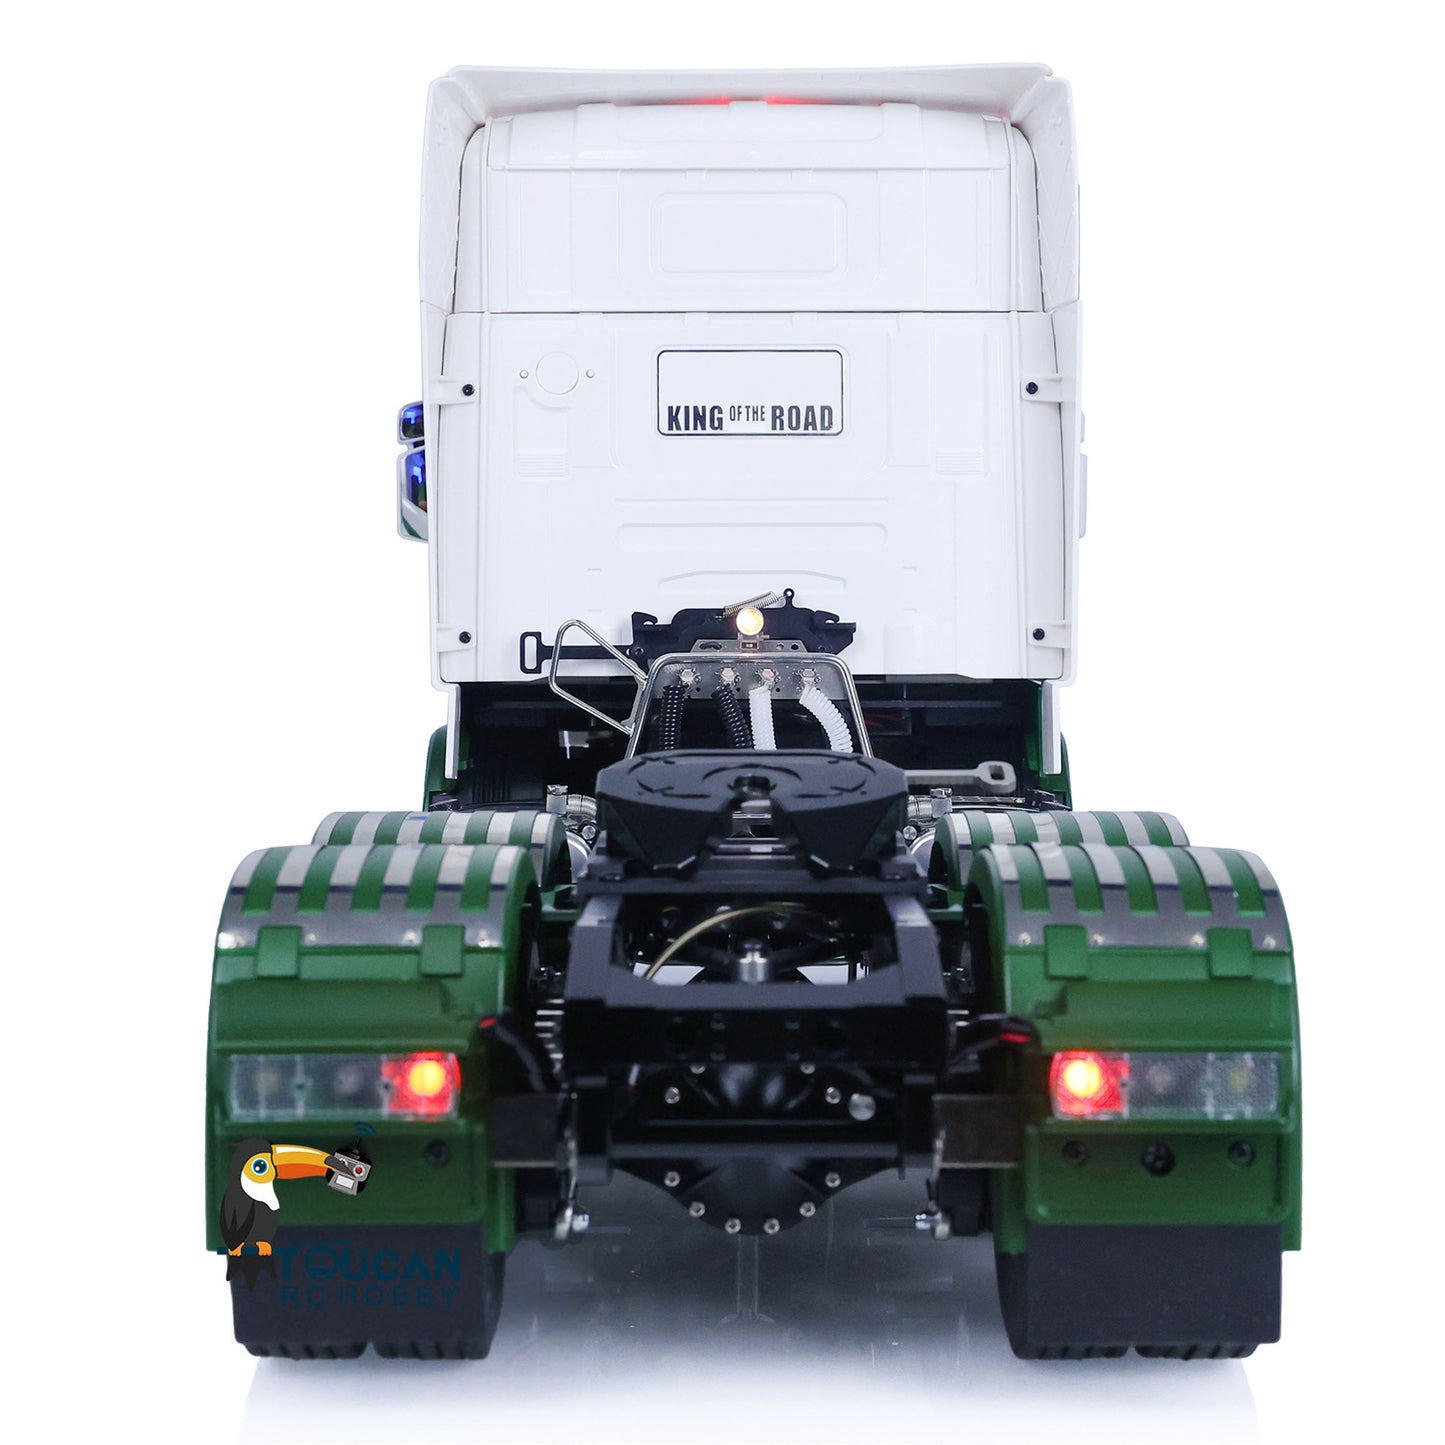 IN STOCK LESU 1:14 Scale DIY Radio Controlled Tractor Truck for Tamiya 6x6 Remote Control Cars Model Battery & Radio System & Charger